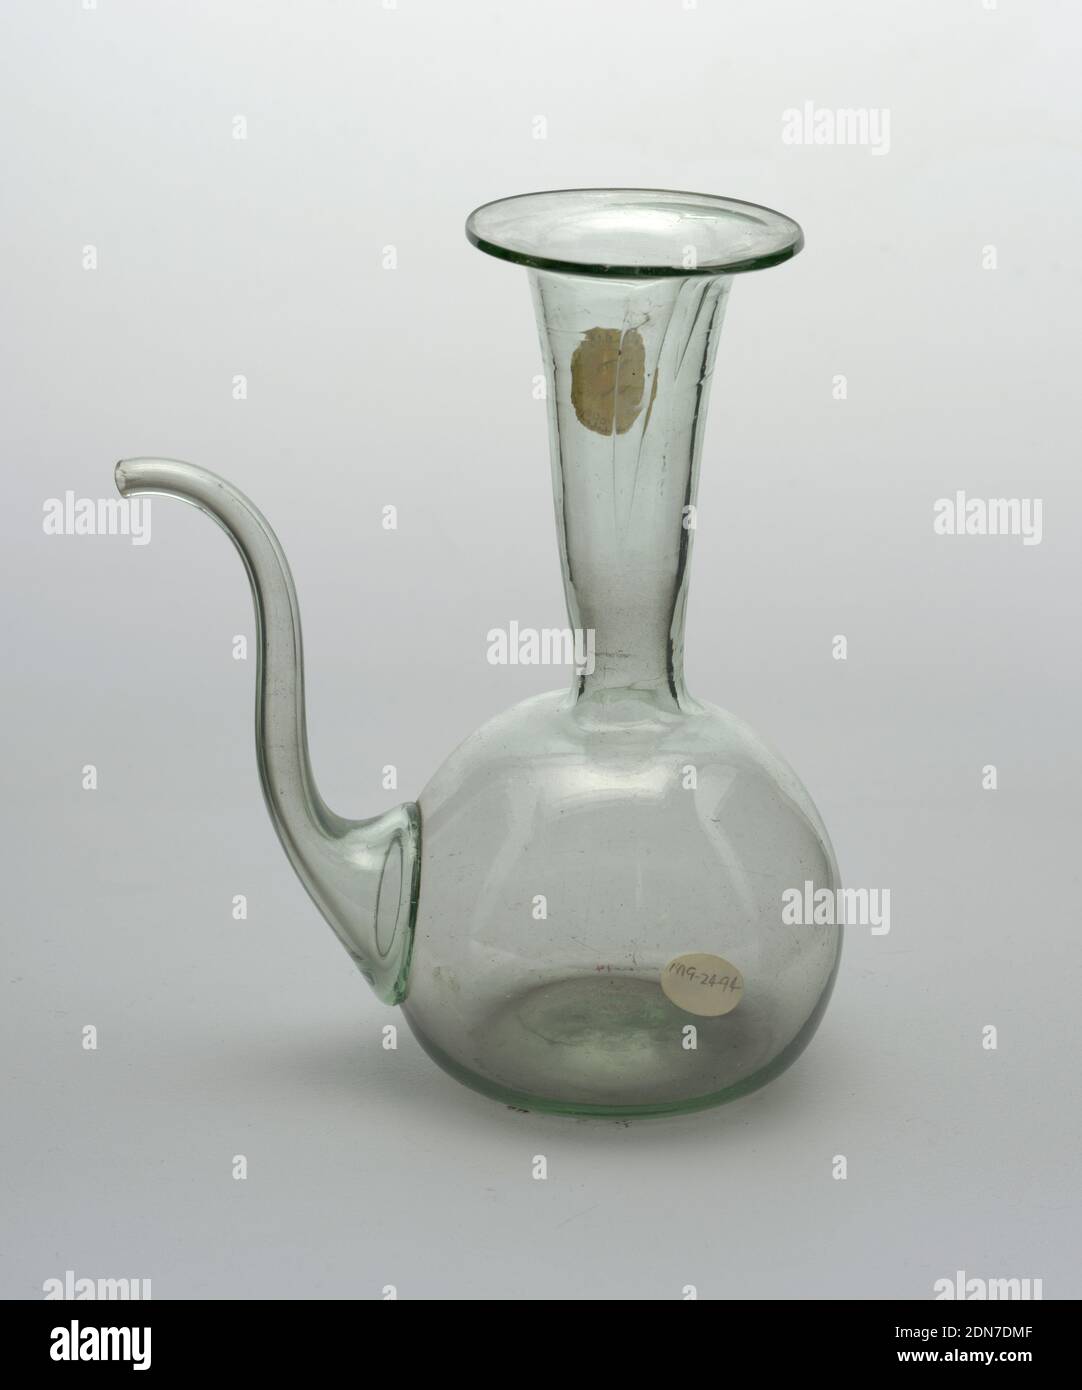 Pitcher, clear and greensih glass, Clear glass spouted vessel with a light green tint., Iran, 17th–18th century, glasswares, Decorative Arts, Pitcher Stock Photo